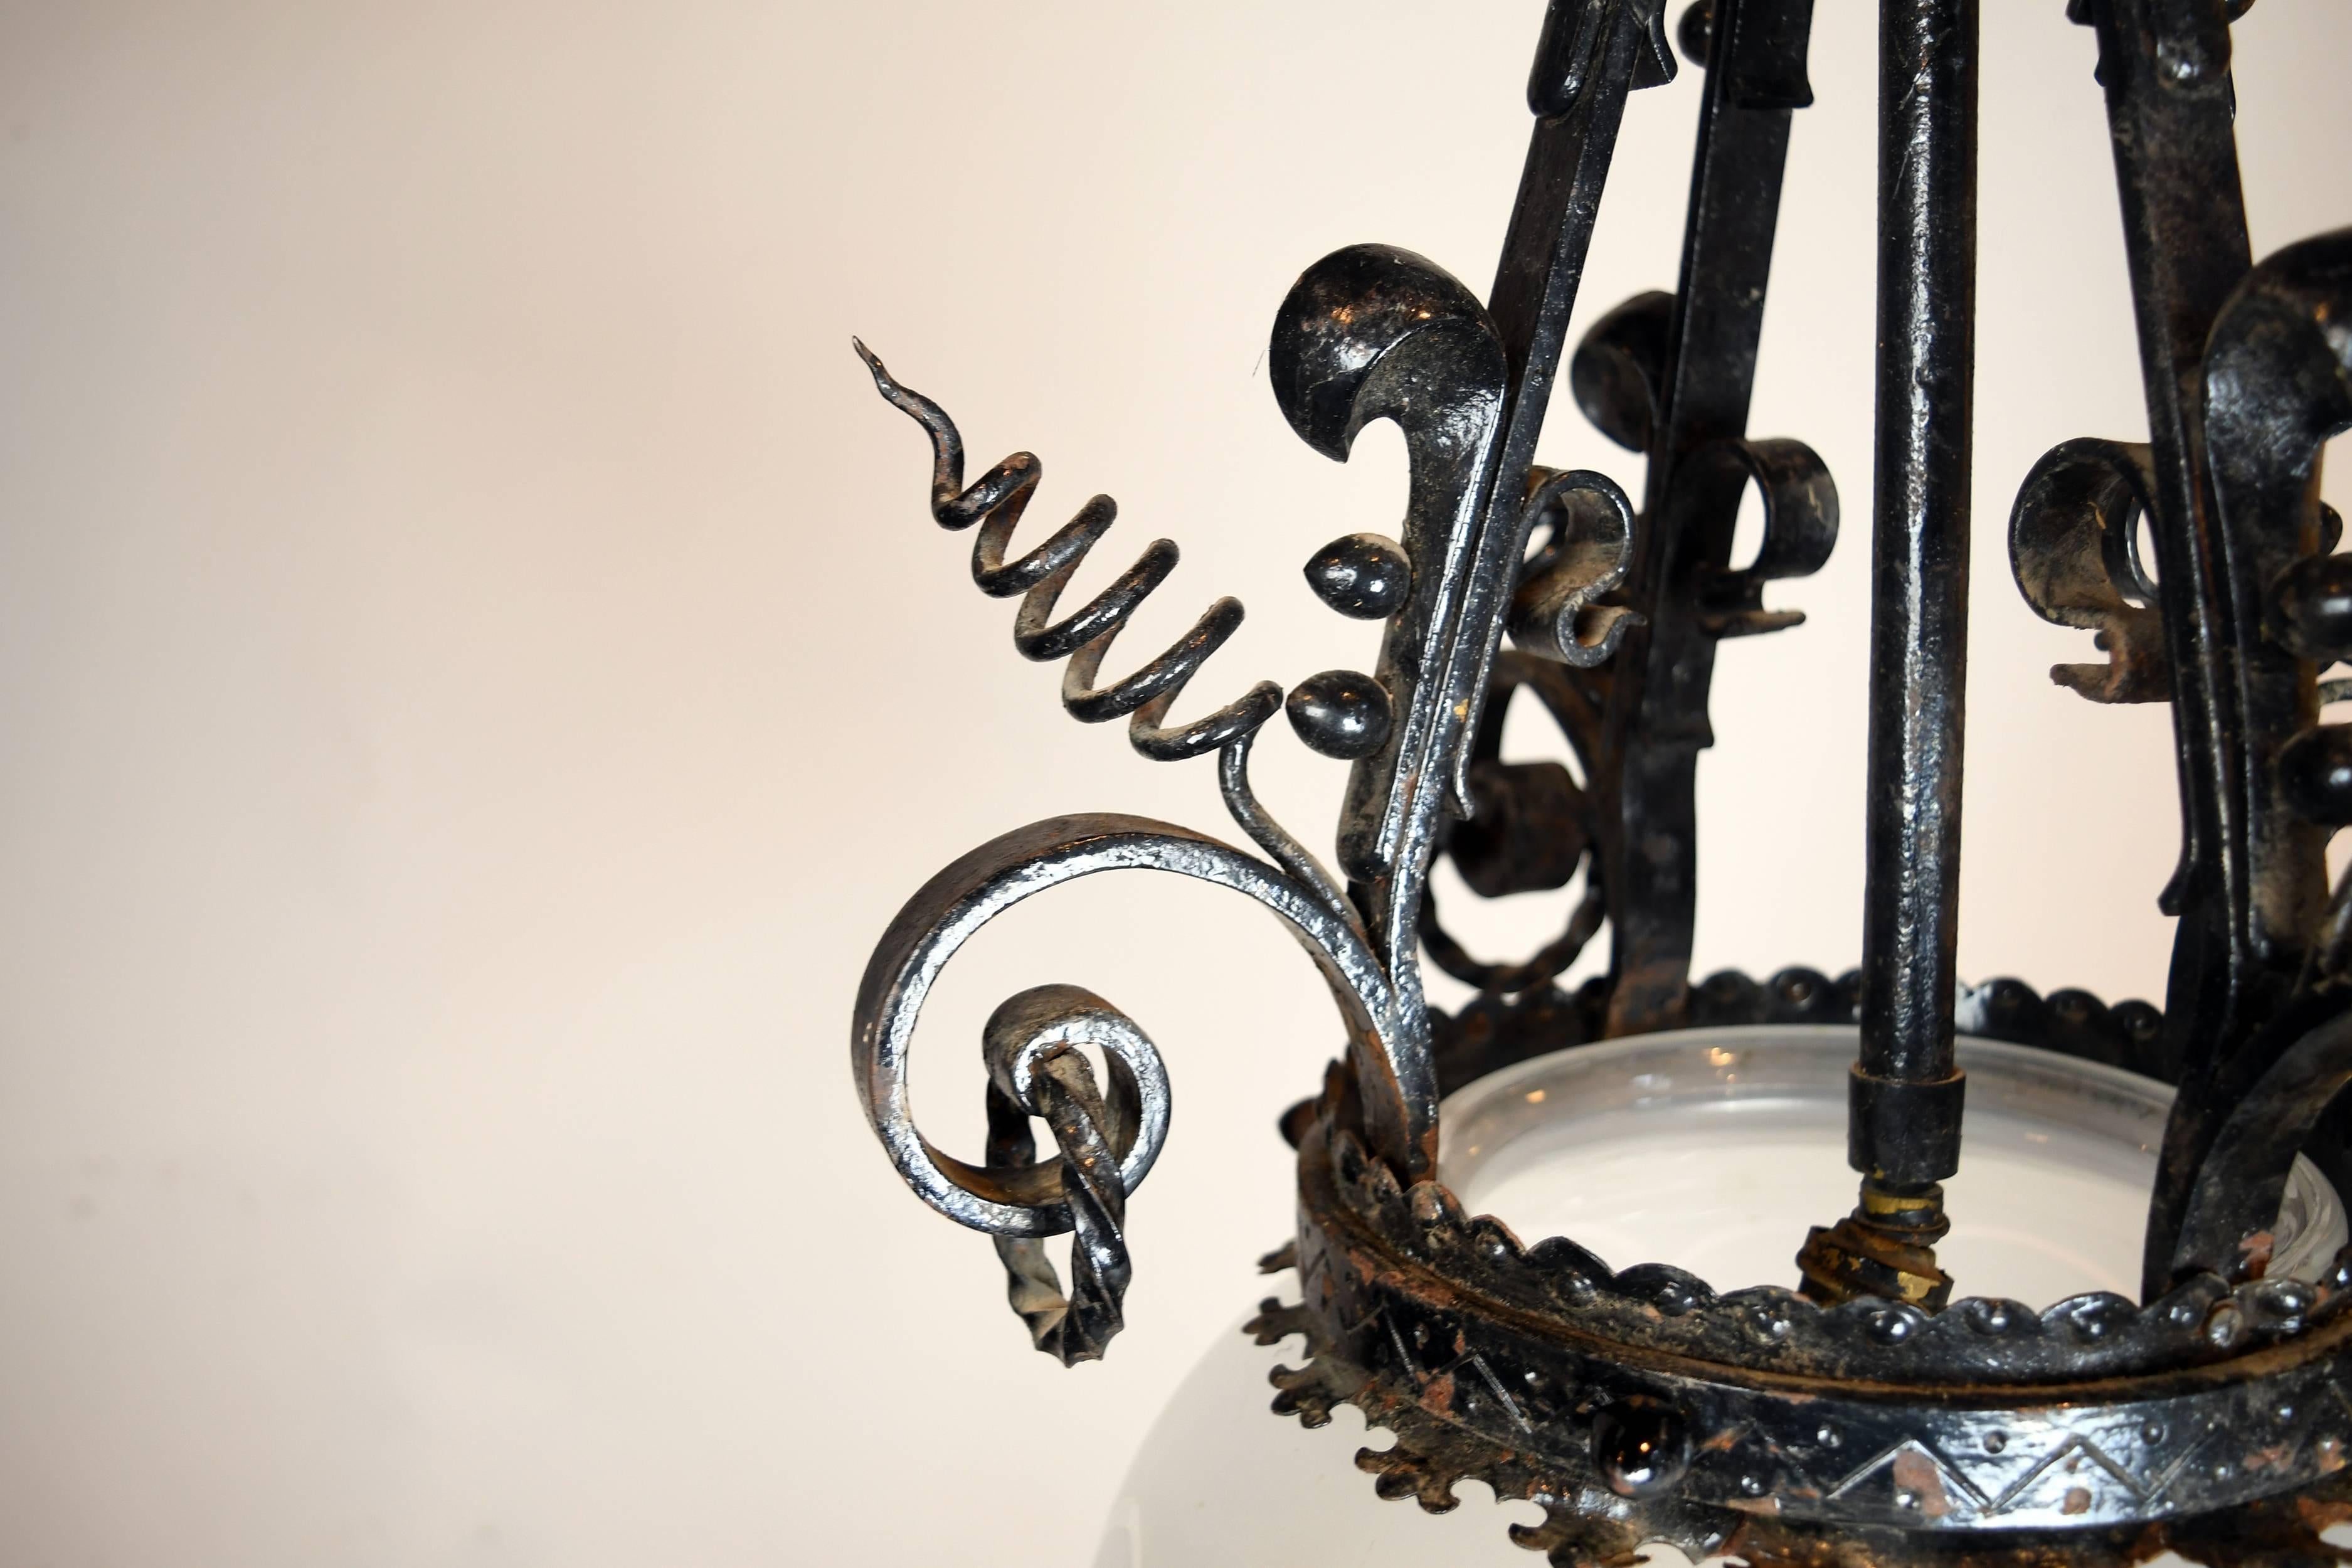 This beautiful iron pendant is adorned with unique Victorian style decorations. The leaf shaped canopy and the spiral corkscrew embellishments are highly decorative and visually stunning. The glass shade is semi-transparent with repeating, circular